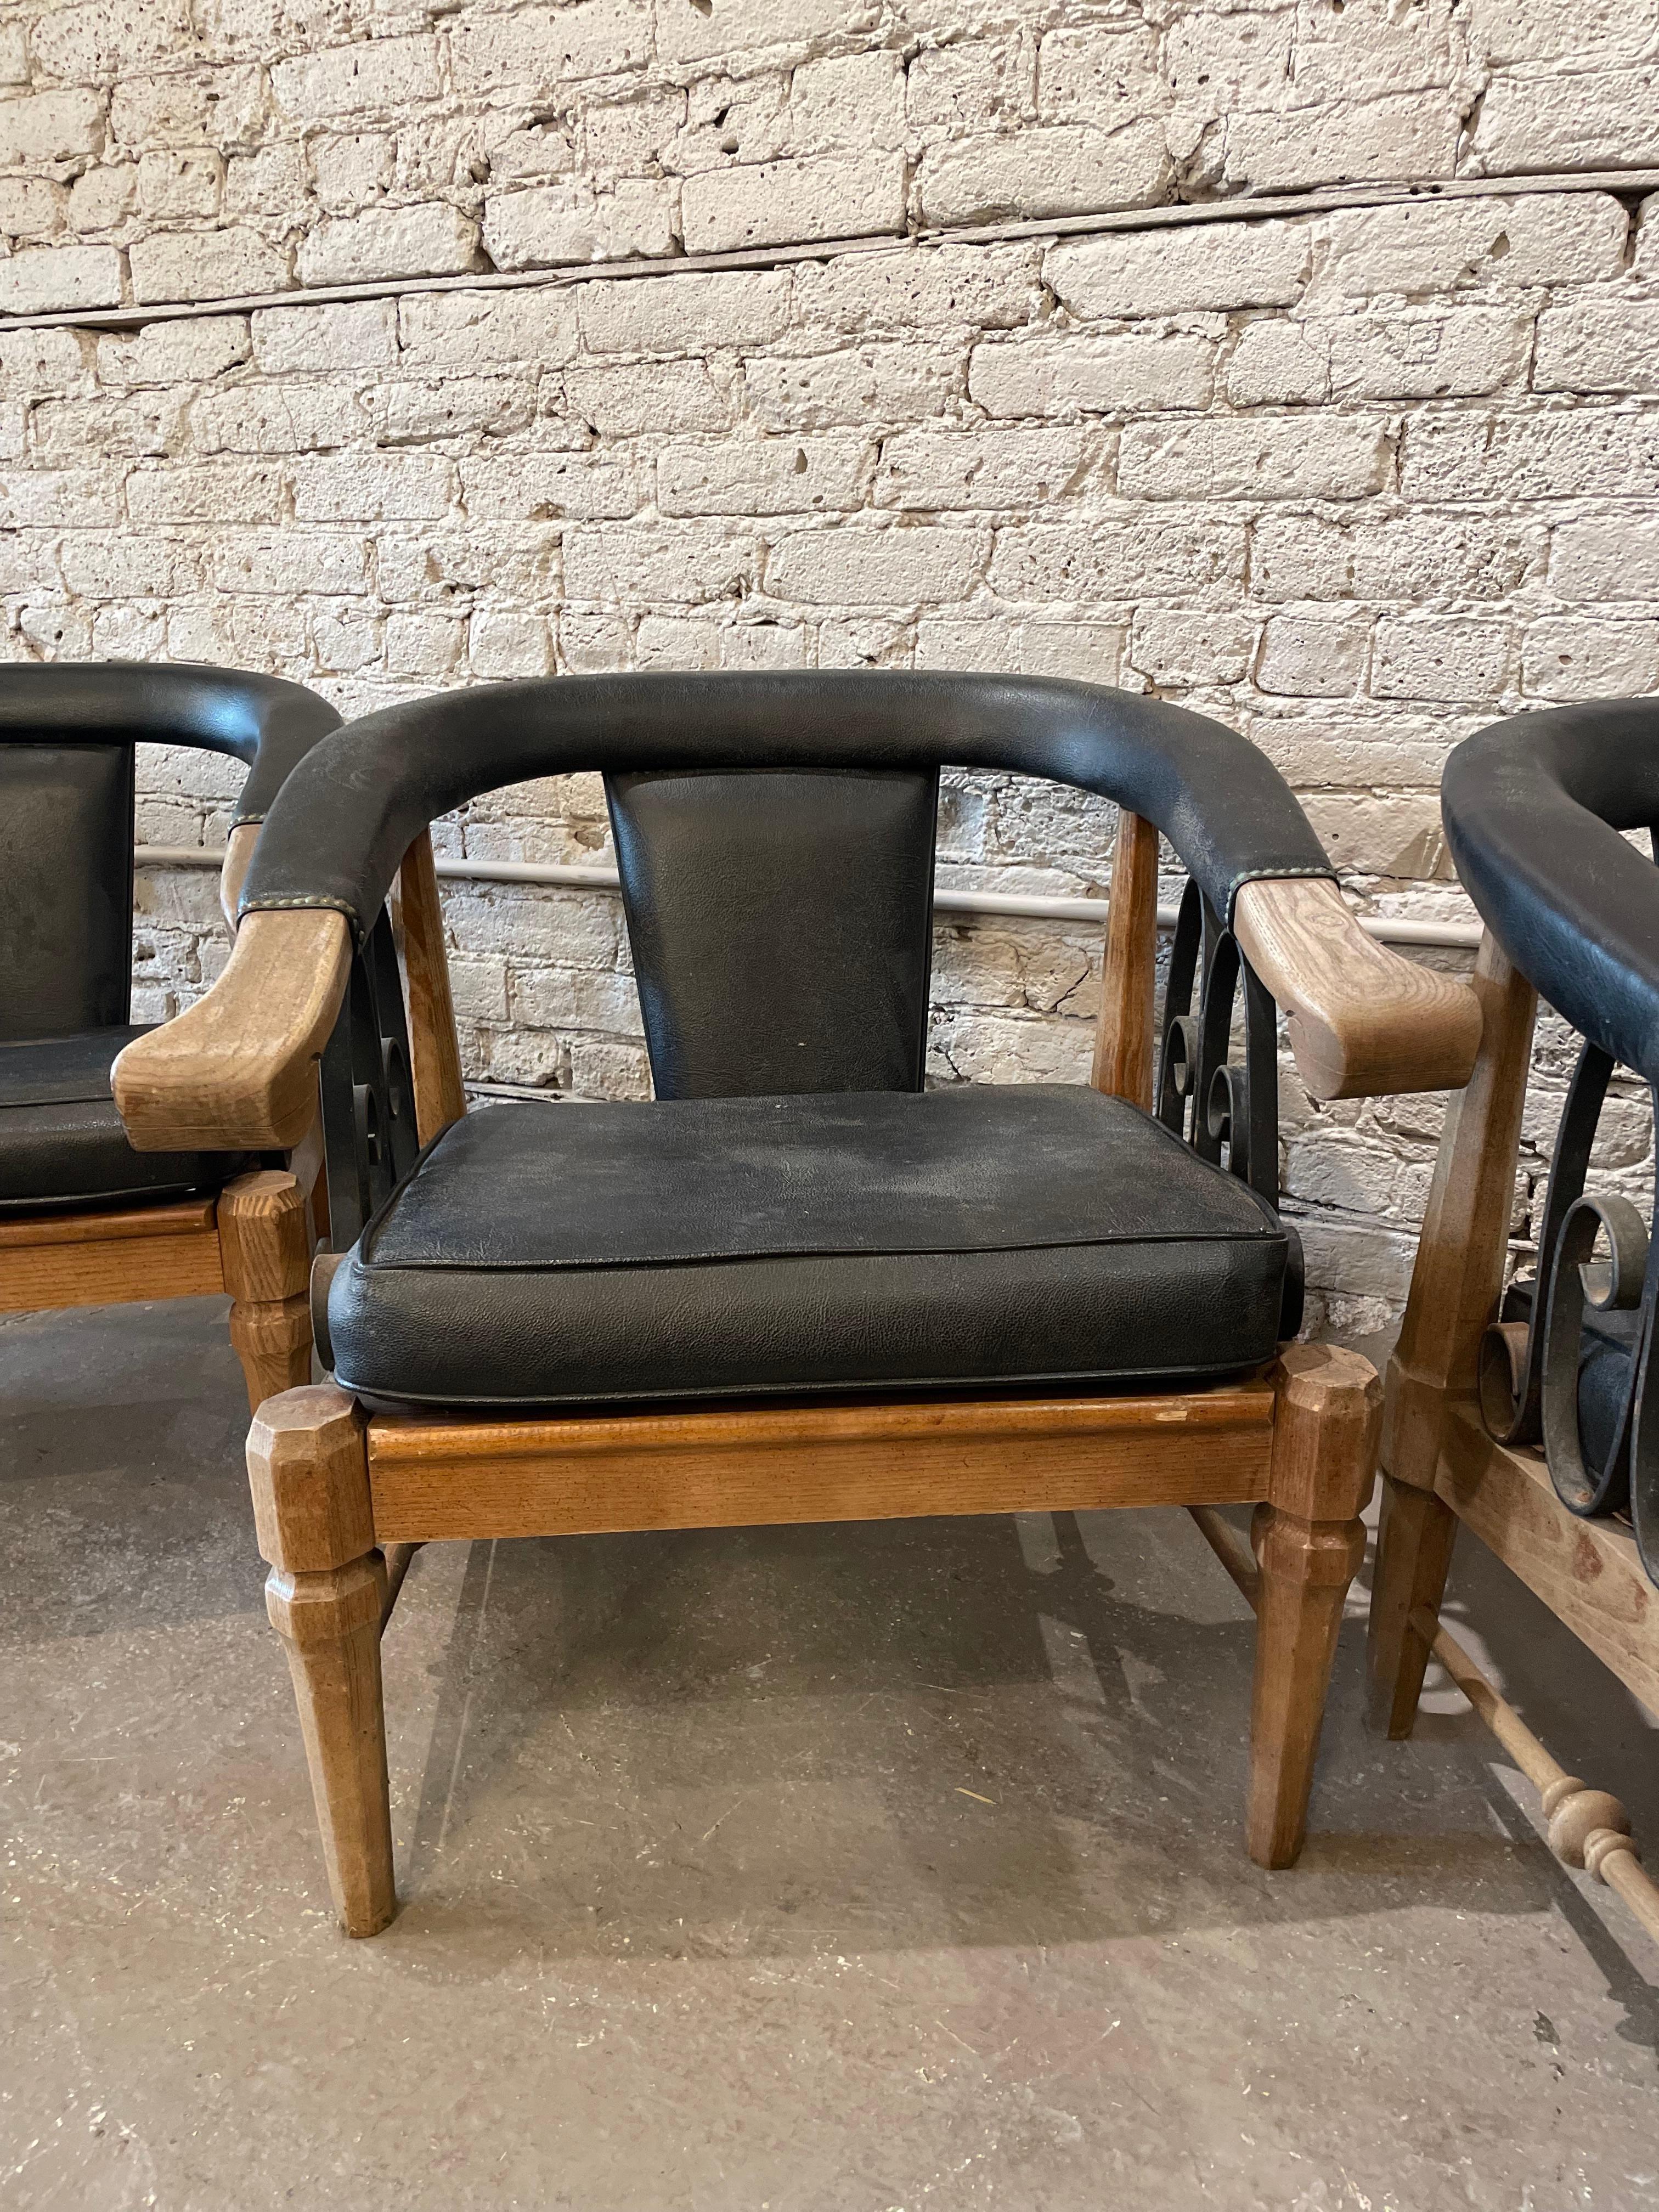 1980s Vintage Horseshoe Chairs - Set of 3 In Fair Condition For Sale In Chicago, IL